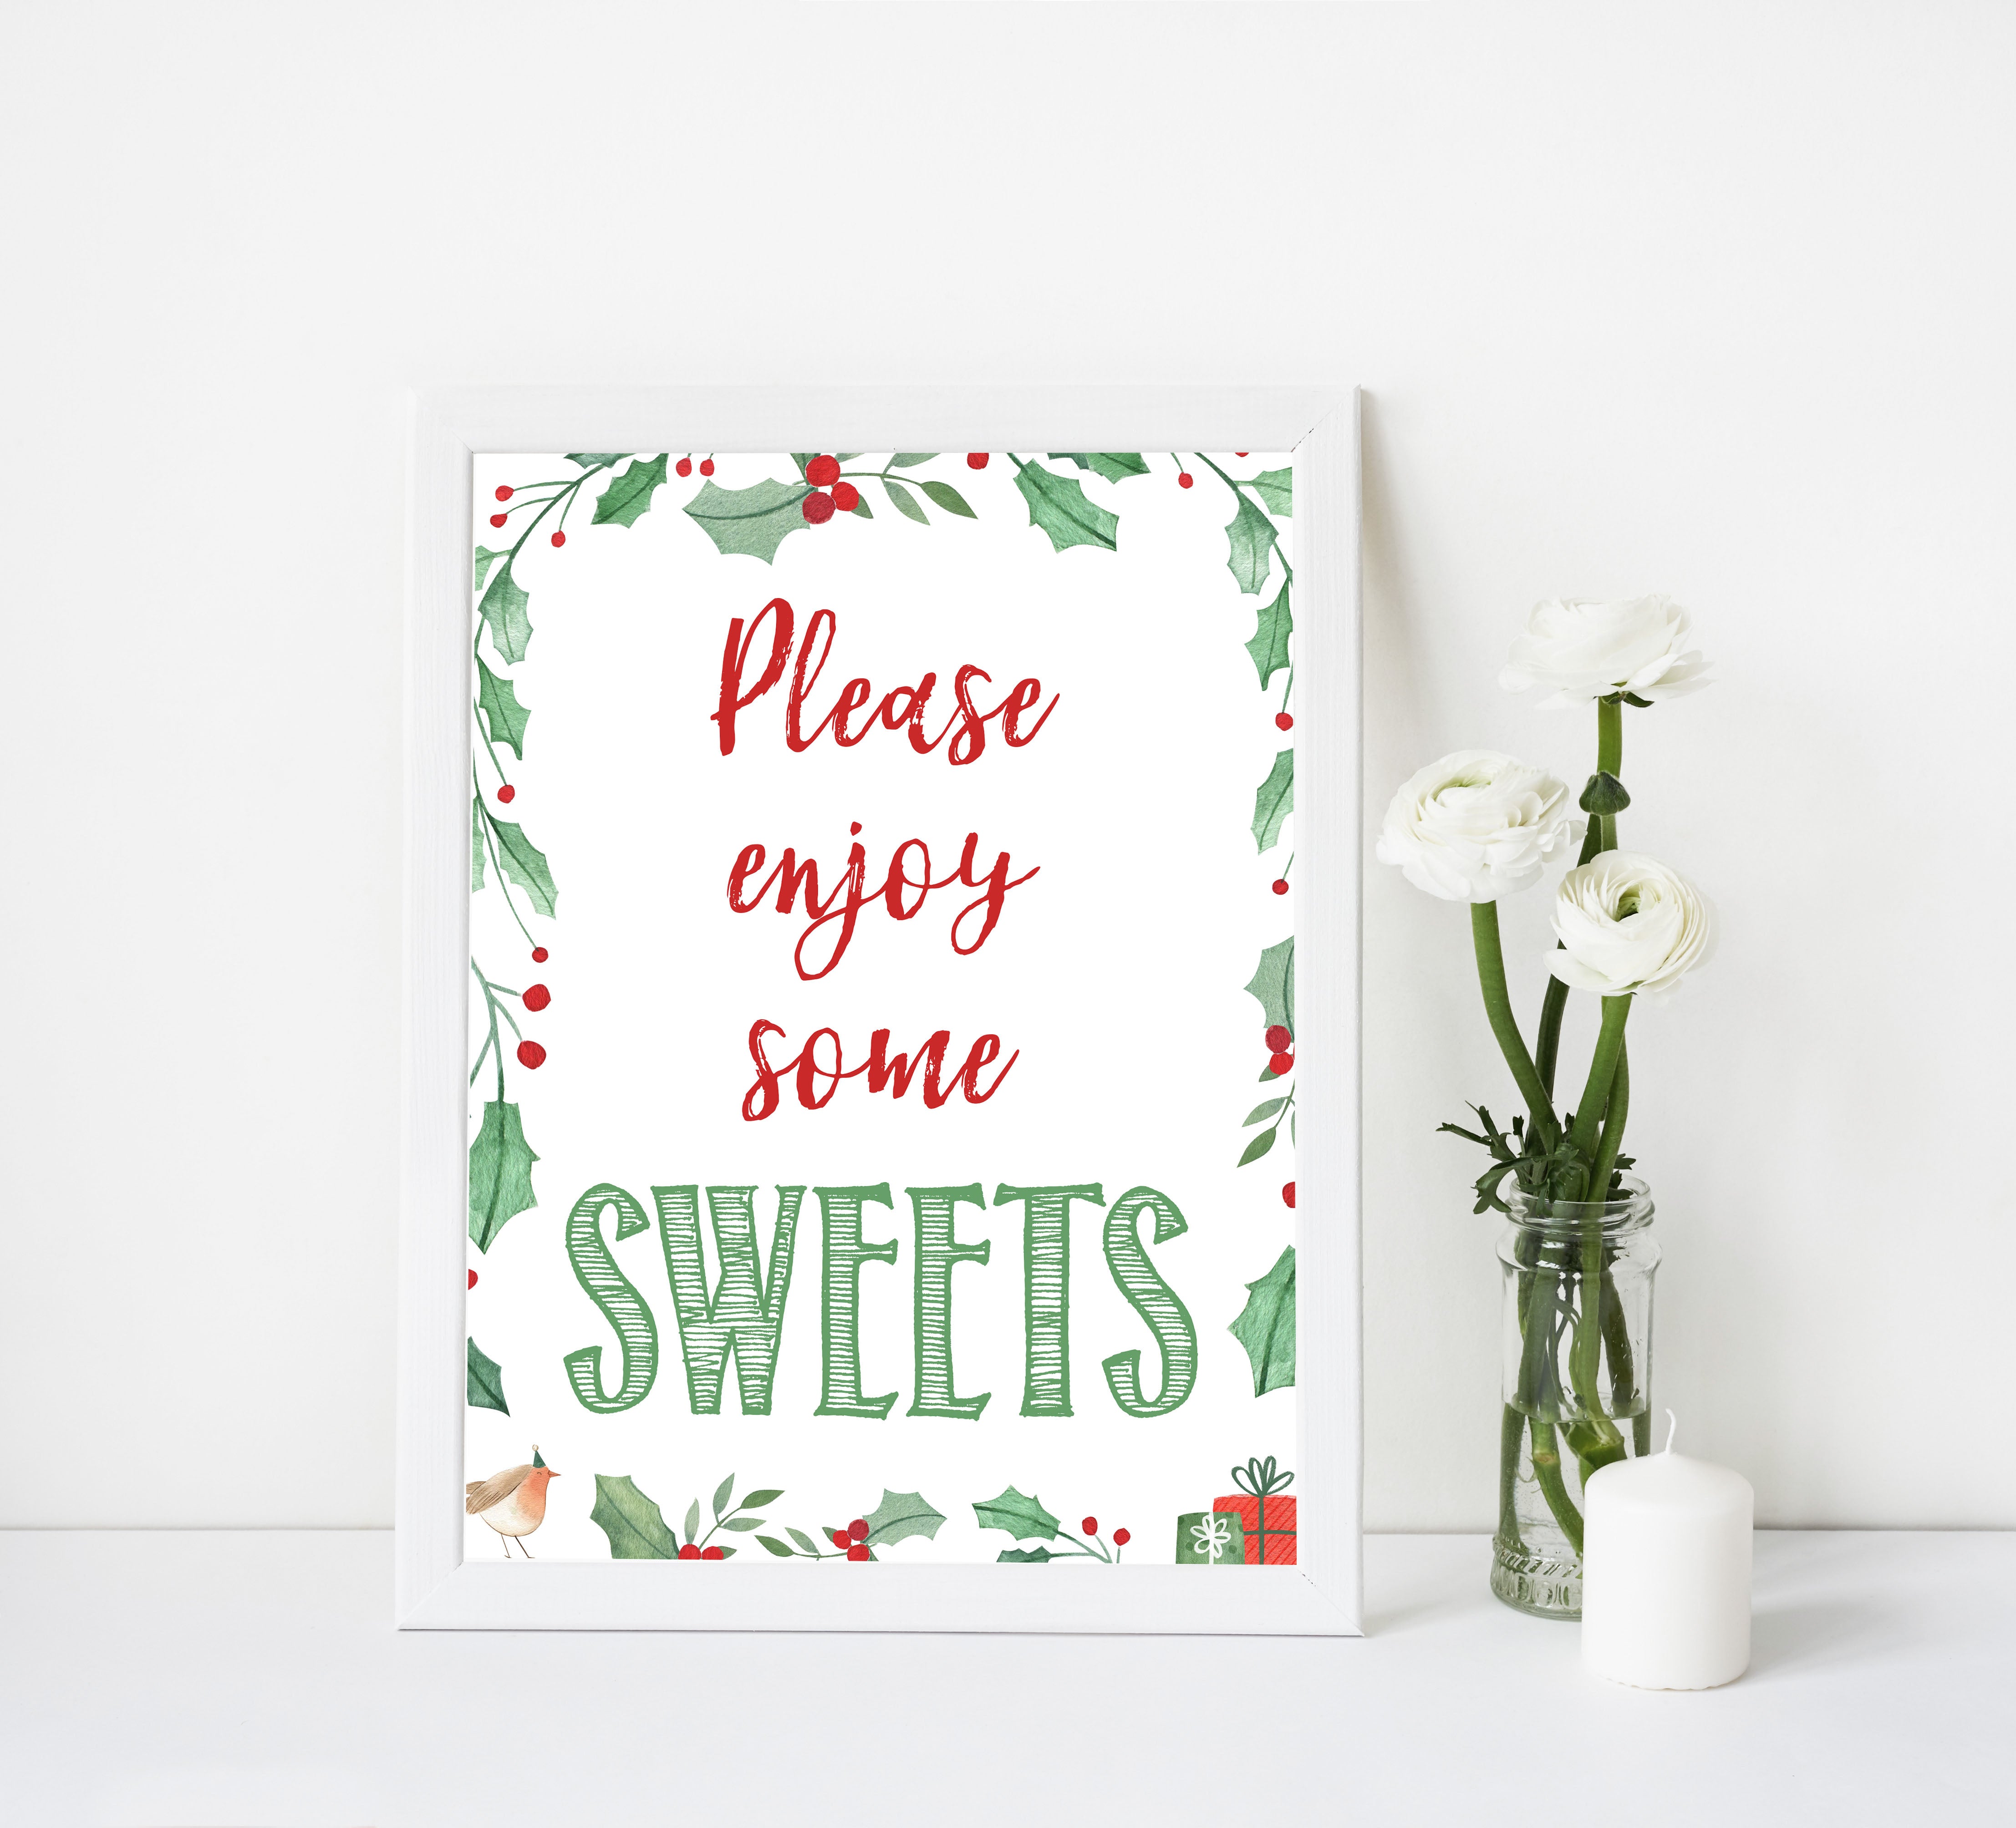 Christmas baby shower signs, sweets baby shower sign, baby shower decor, printable baby signs, baby decor, festive baby shower